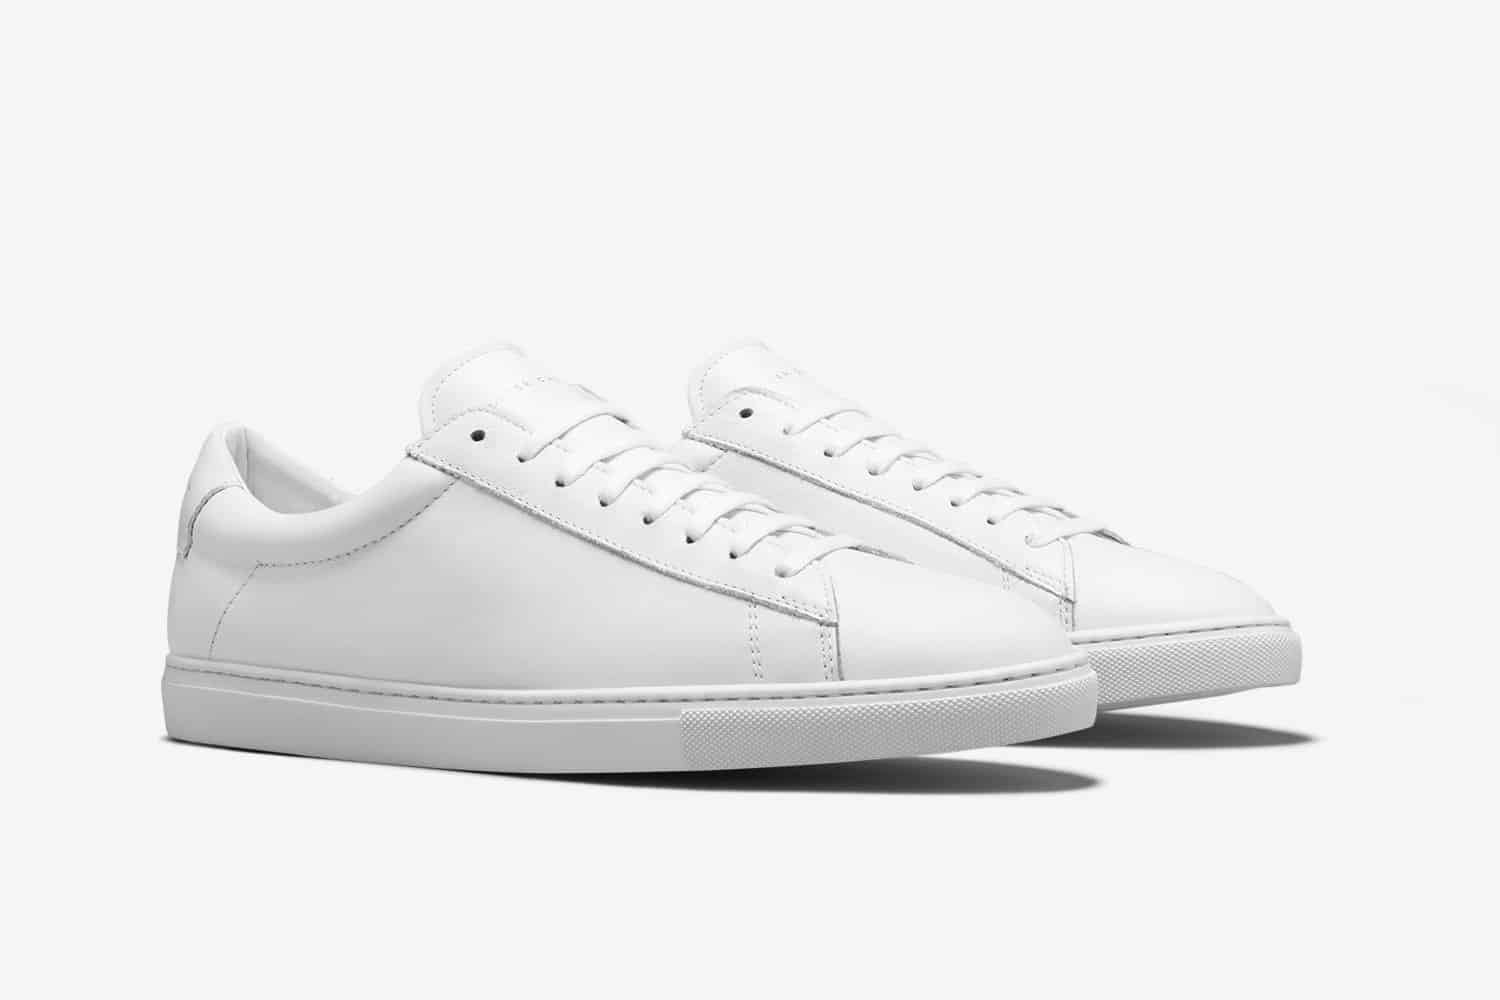 Oliver Cabell Low 1 Sneakers